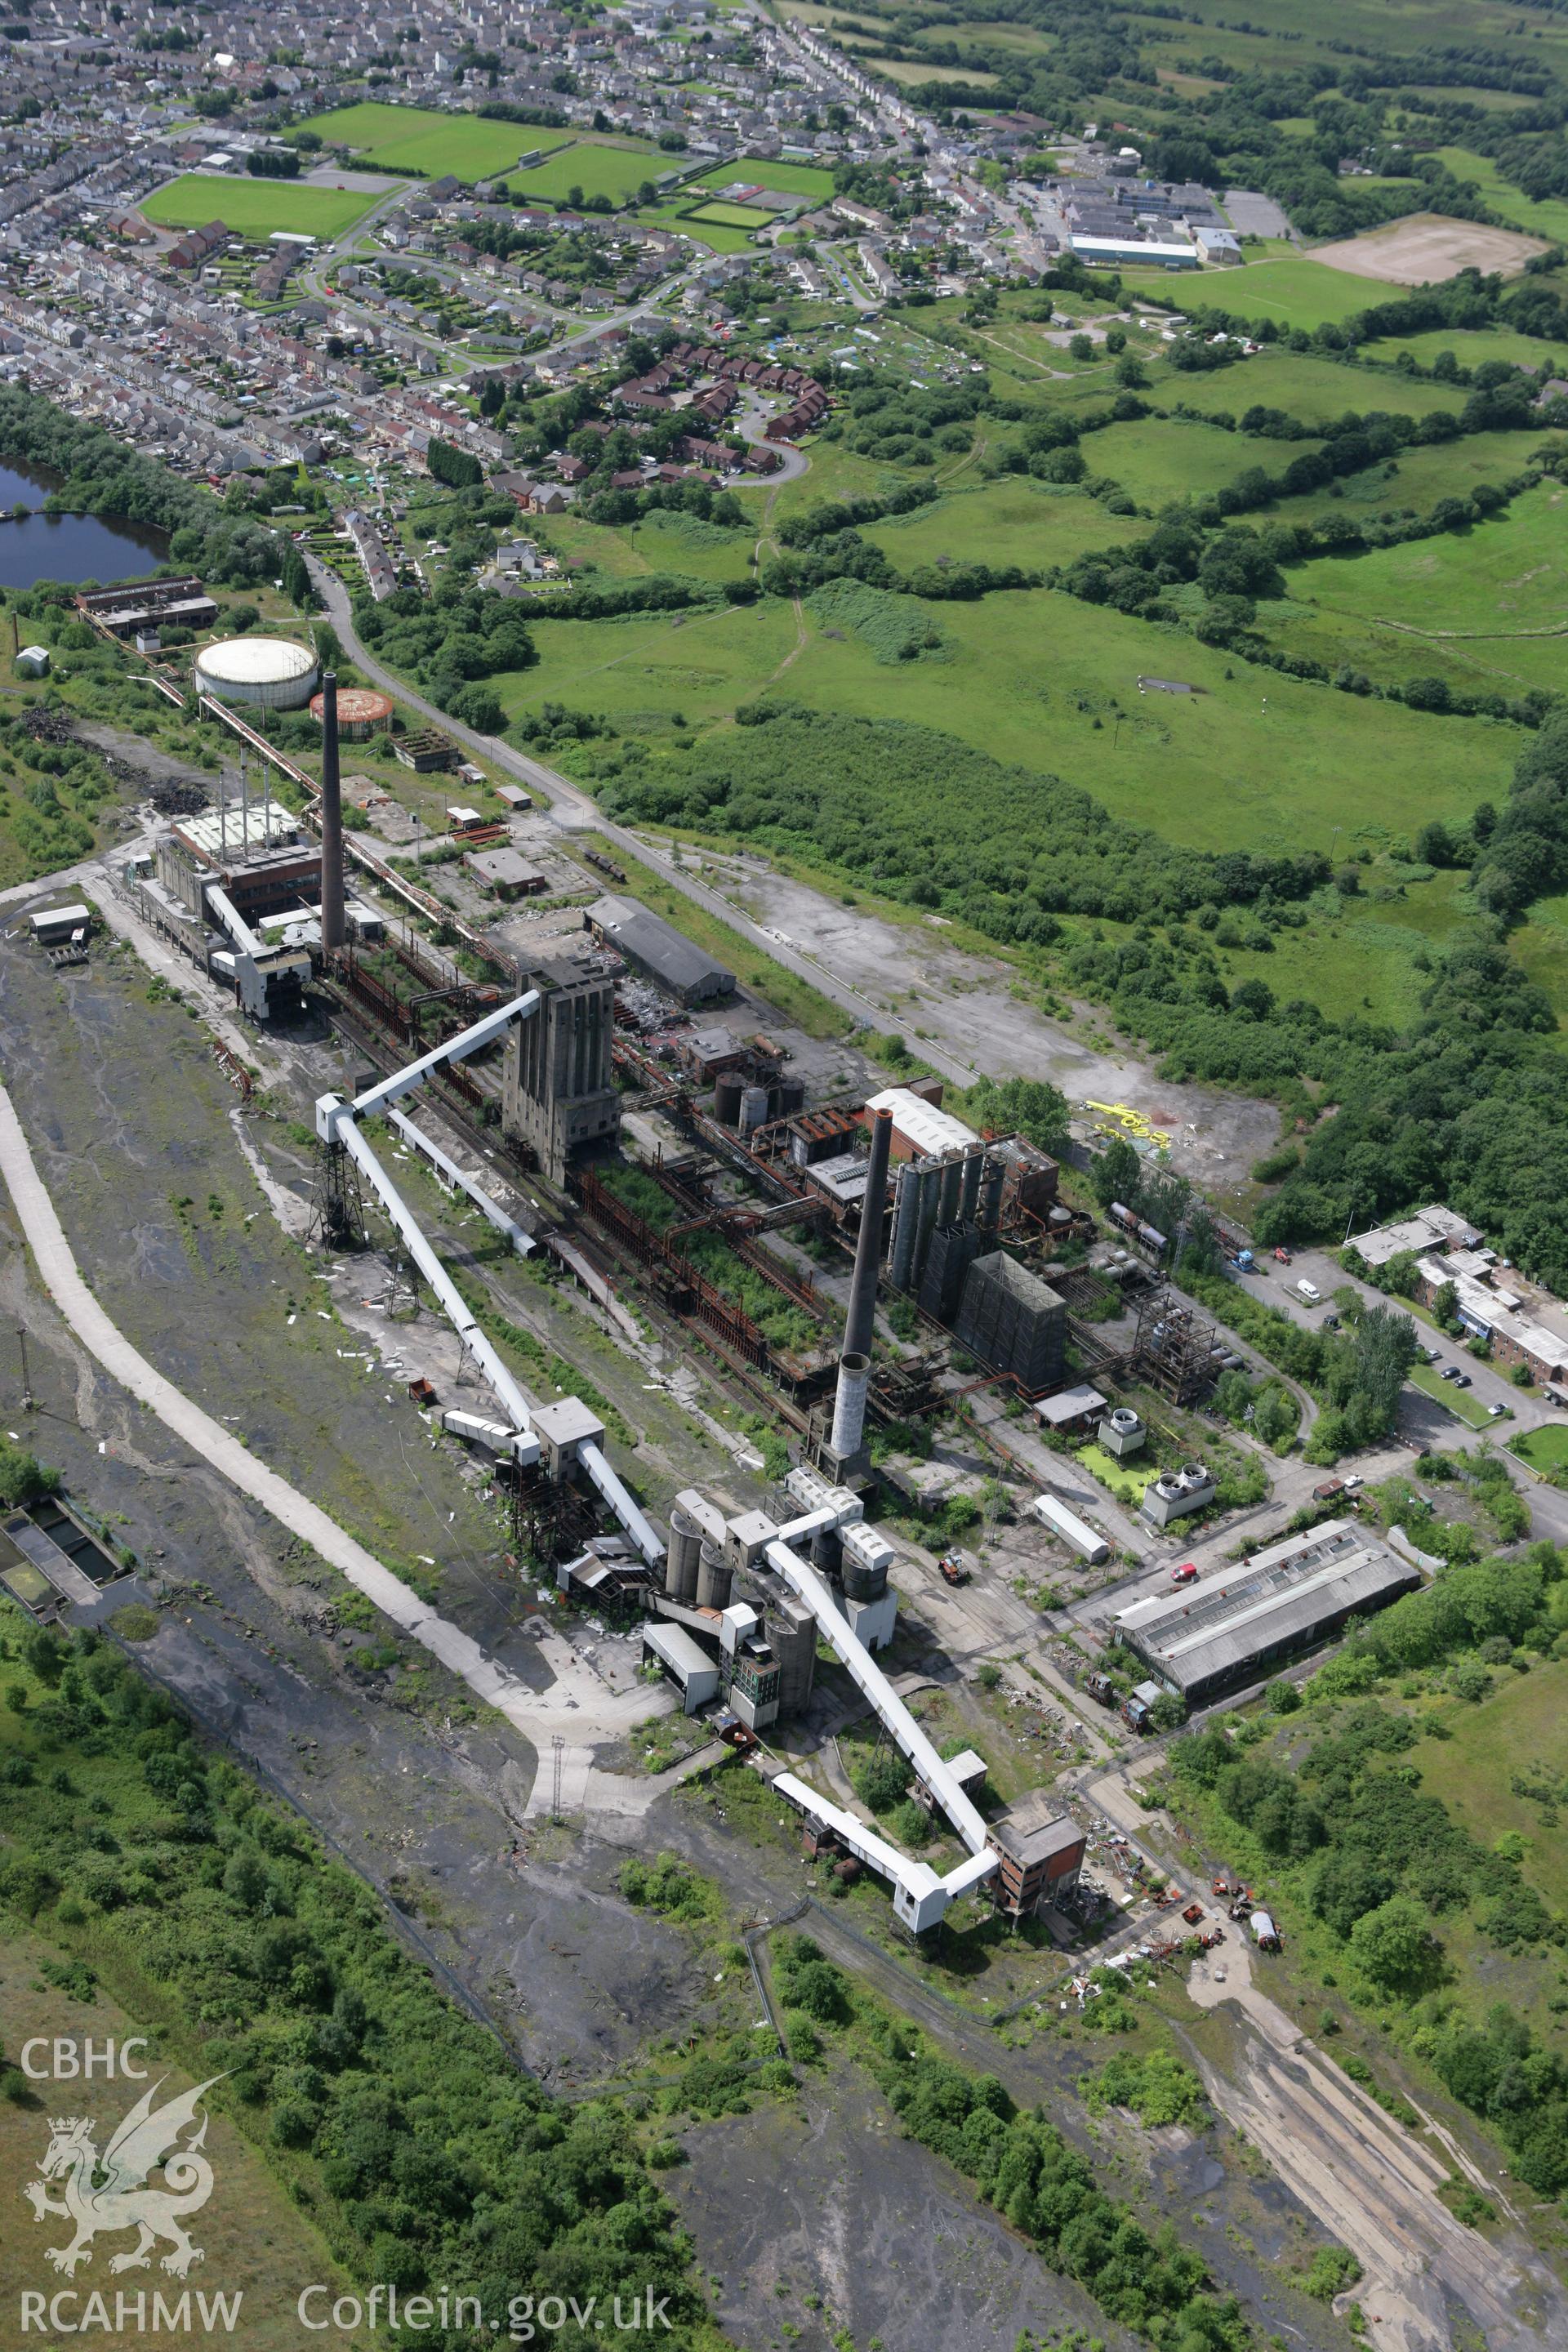 RCAHMW colour oblique photograph of Cwm Coking Works, Llantwit Fardre. Taken by Toby Driver on 21/07/2008.